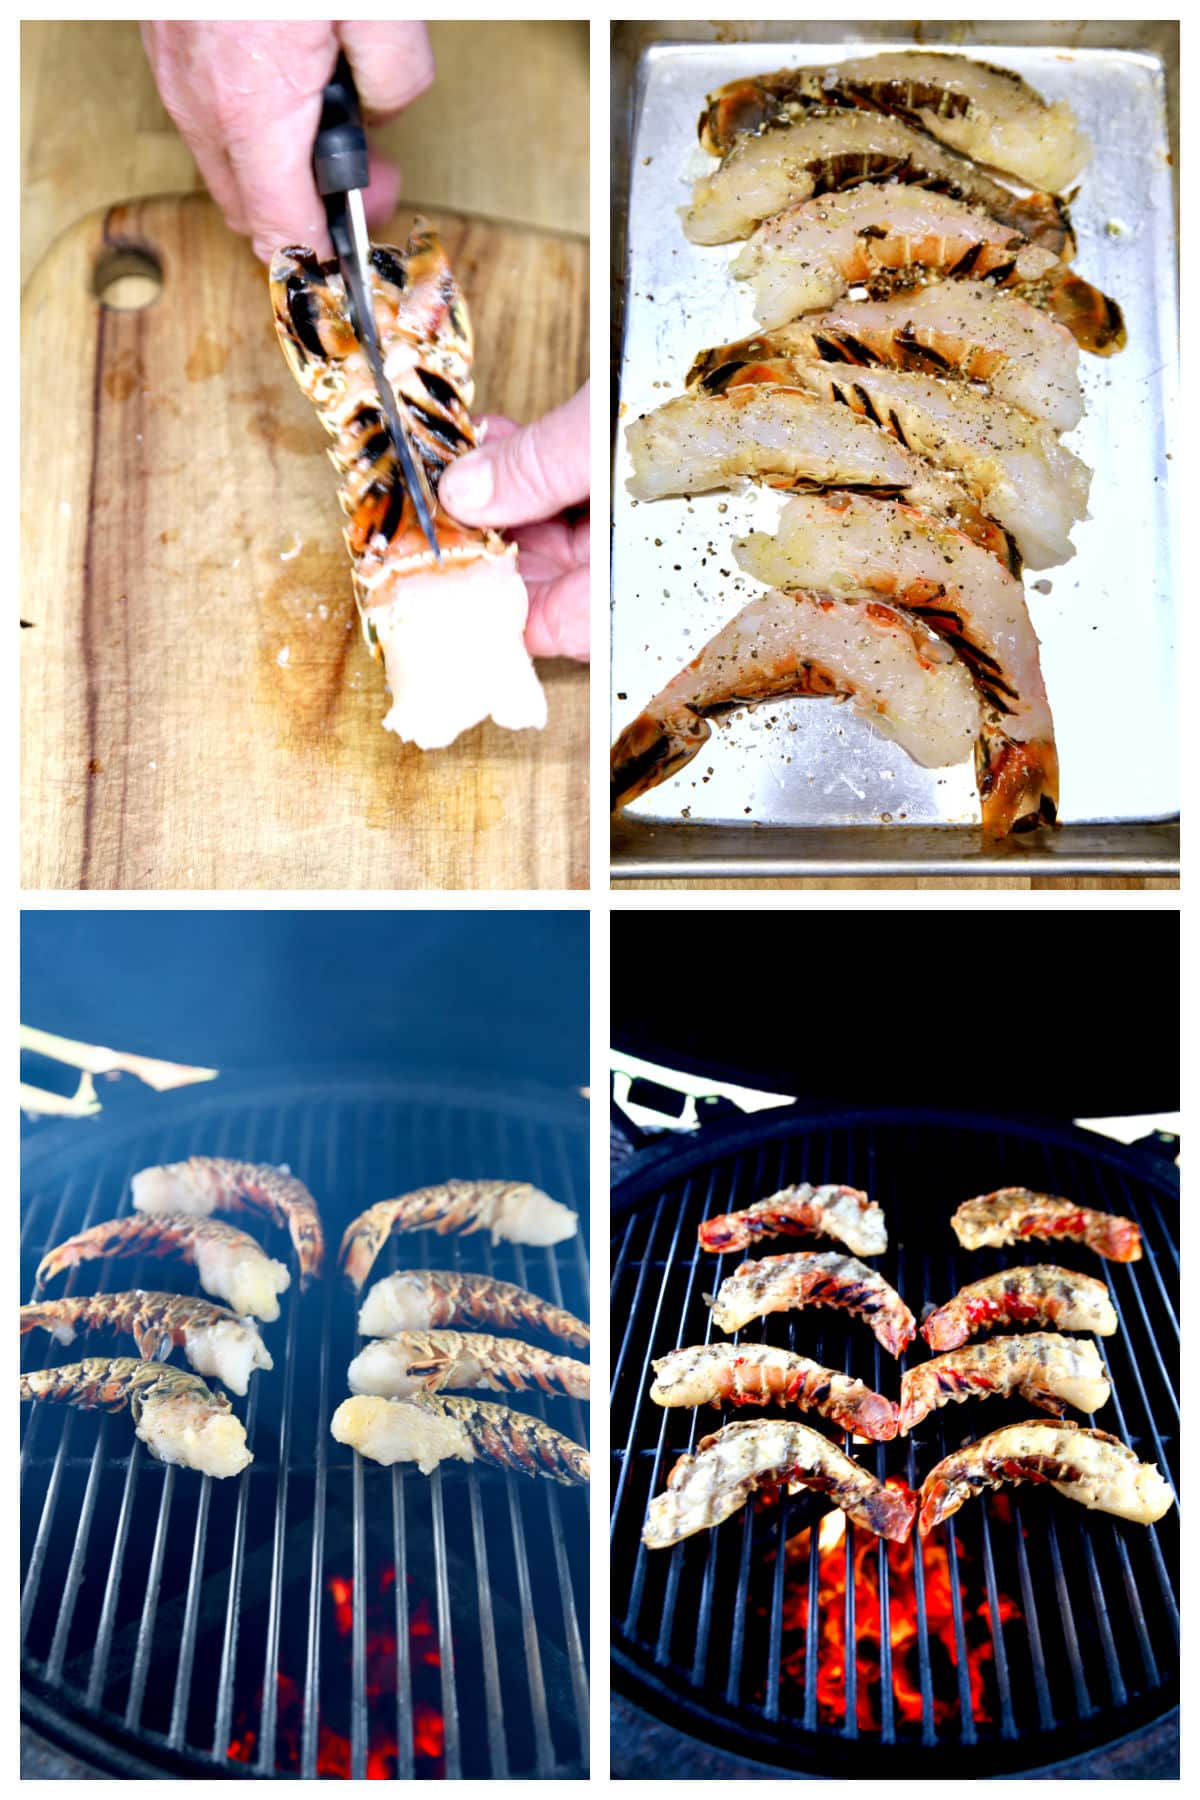 Cutting lobster tails in half, seasoning, grilling (collage).